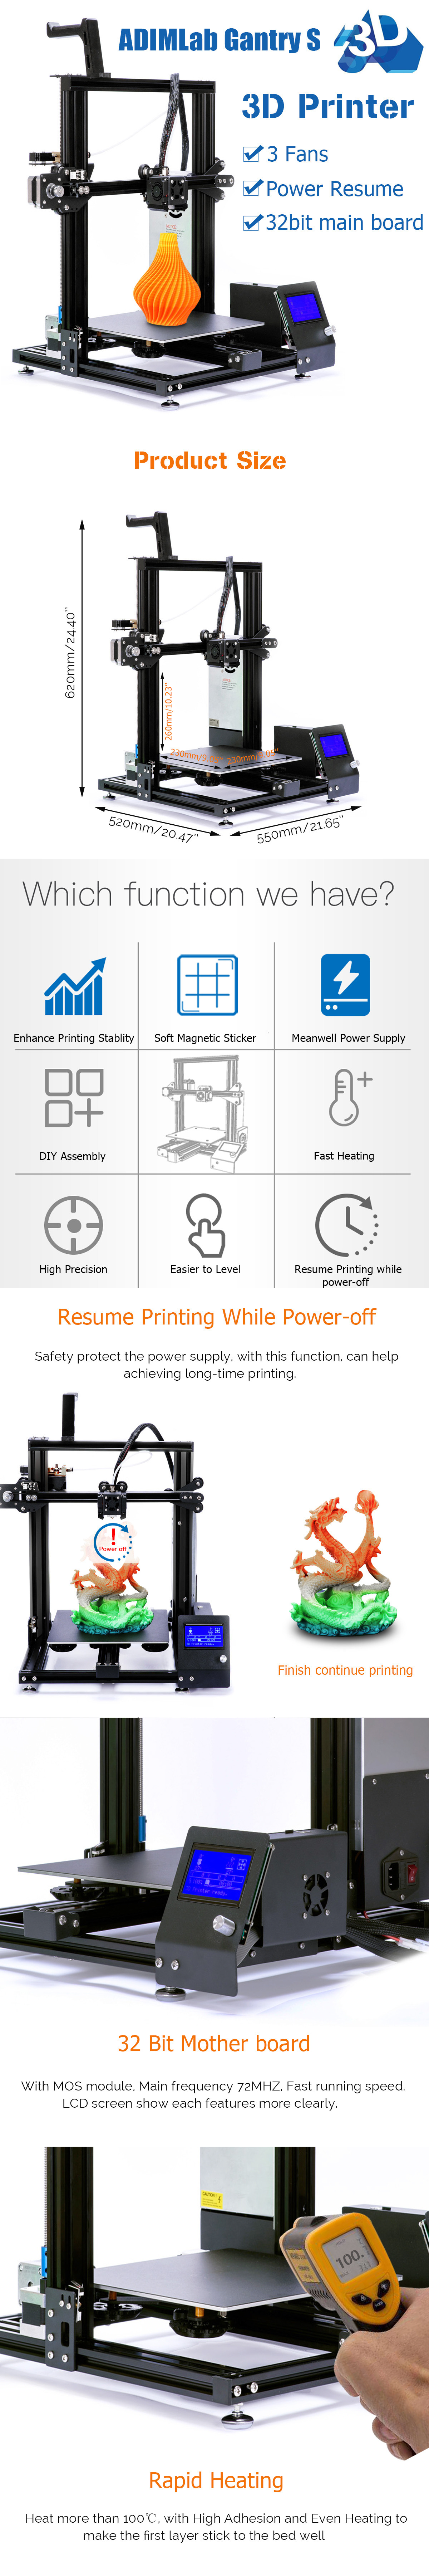 ADIMLab Gantry-S 3D Printer DIY Kit 230*230*260mm Printing Size Support Power Resume/Filament Run-out Detector w/ Metal Extruder & 3 Fans for V6 T 5